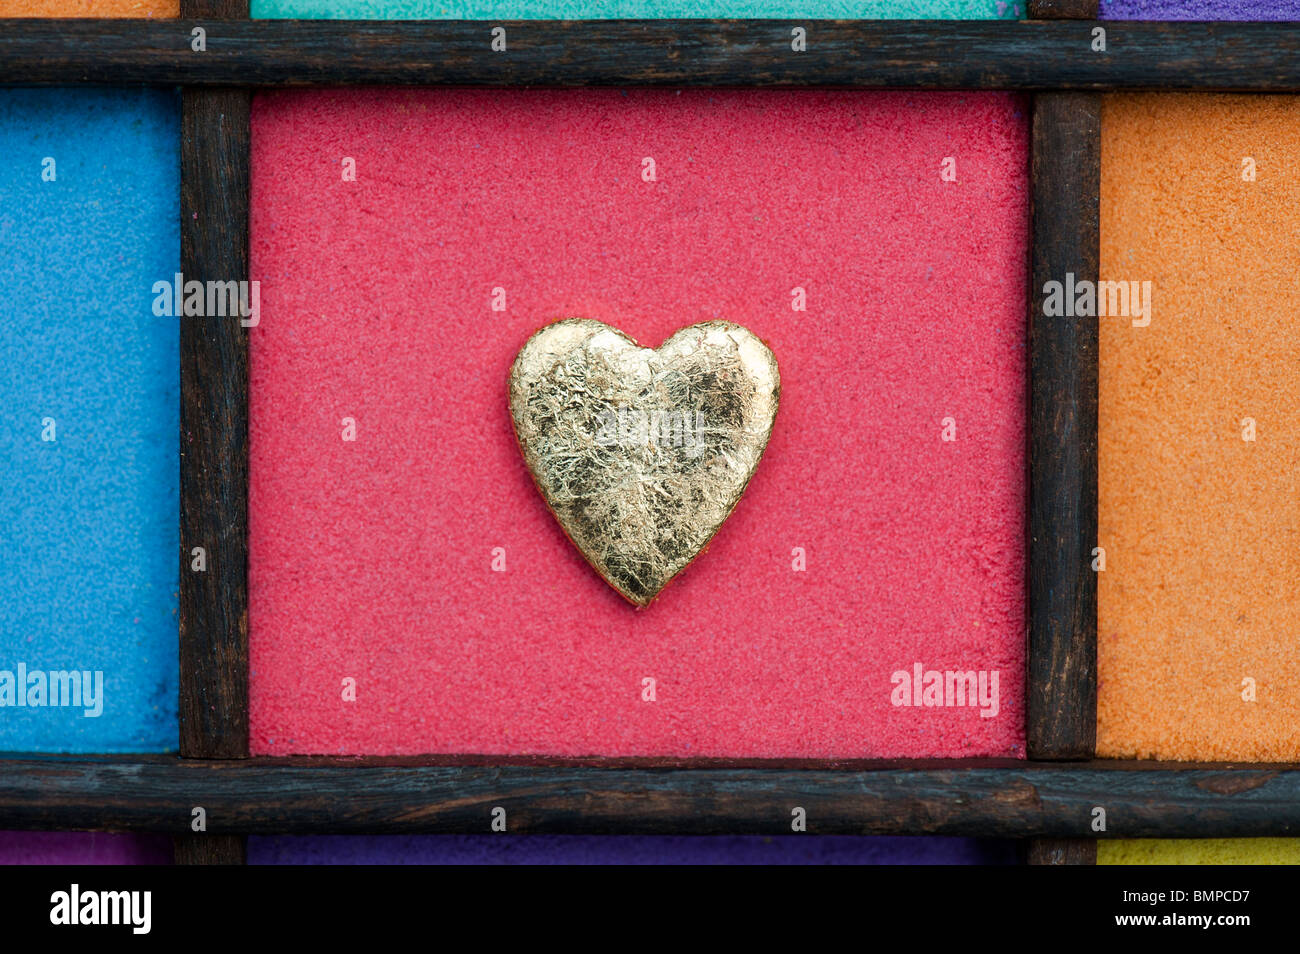 Gold heart shape against red sand in a wooden tray Stock Photo